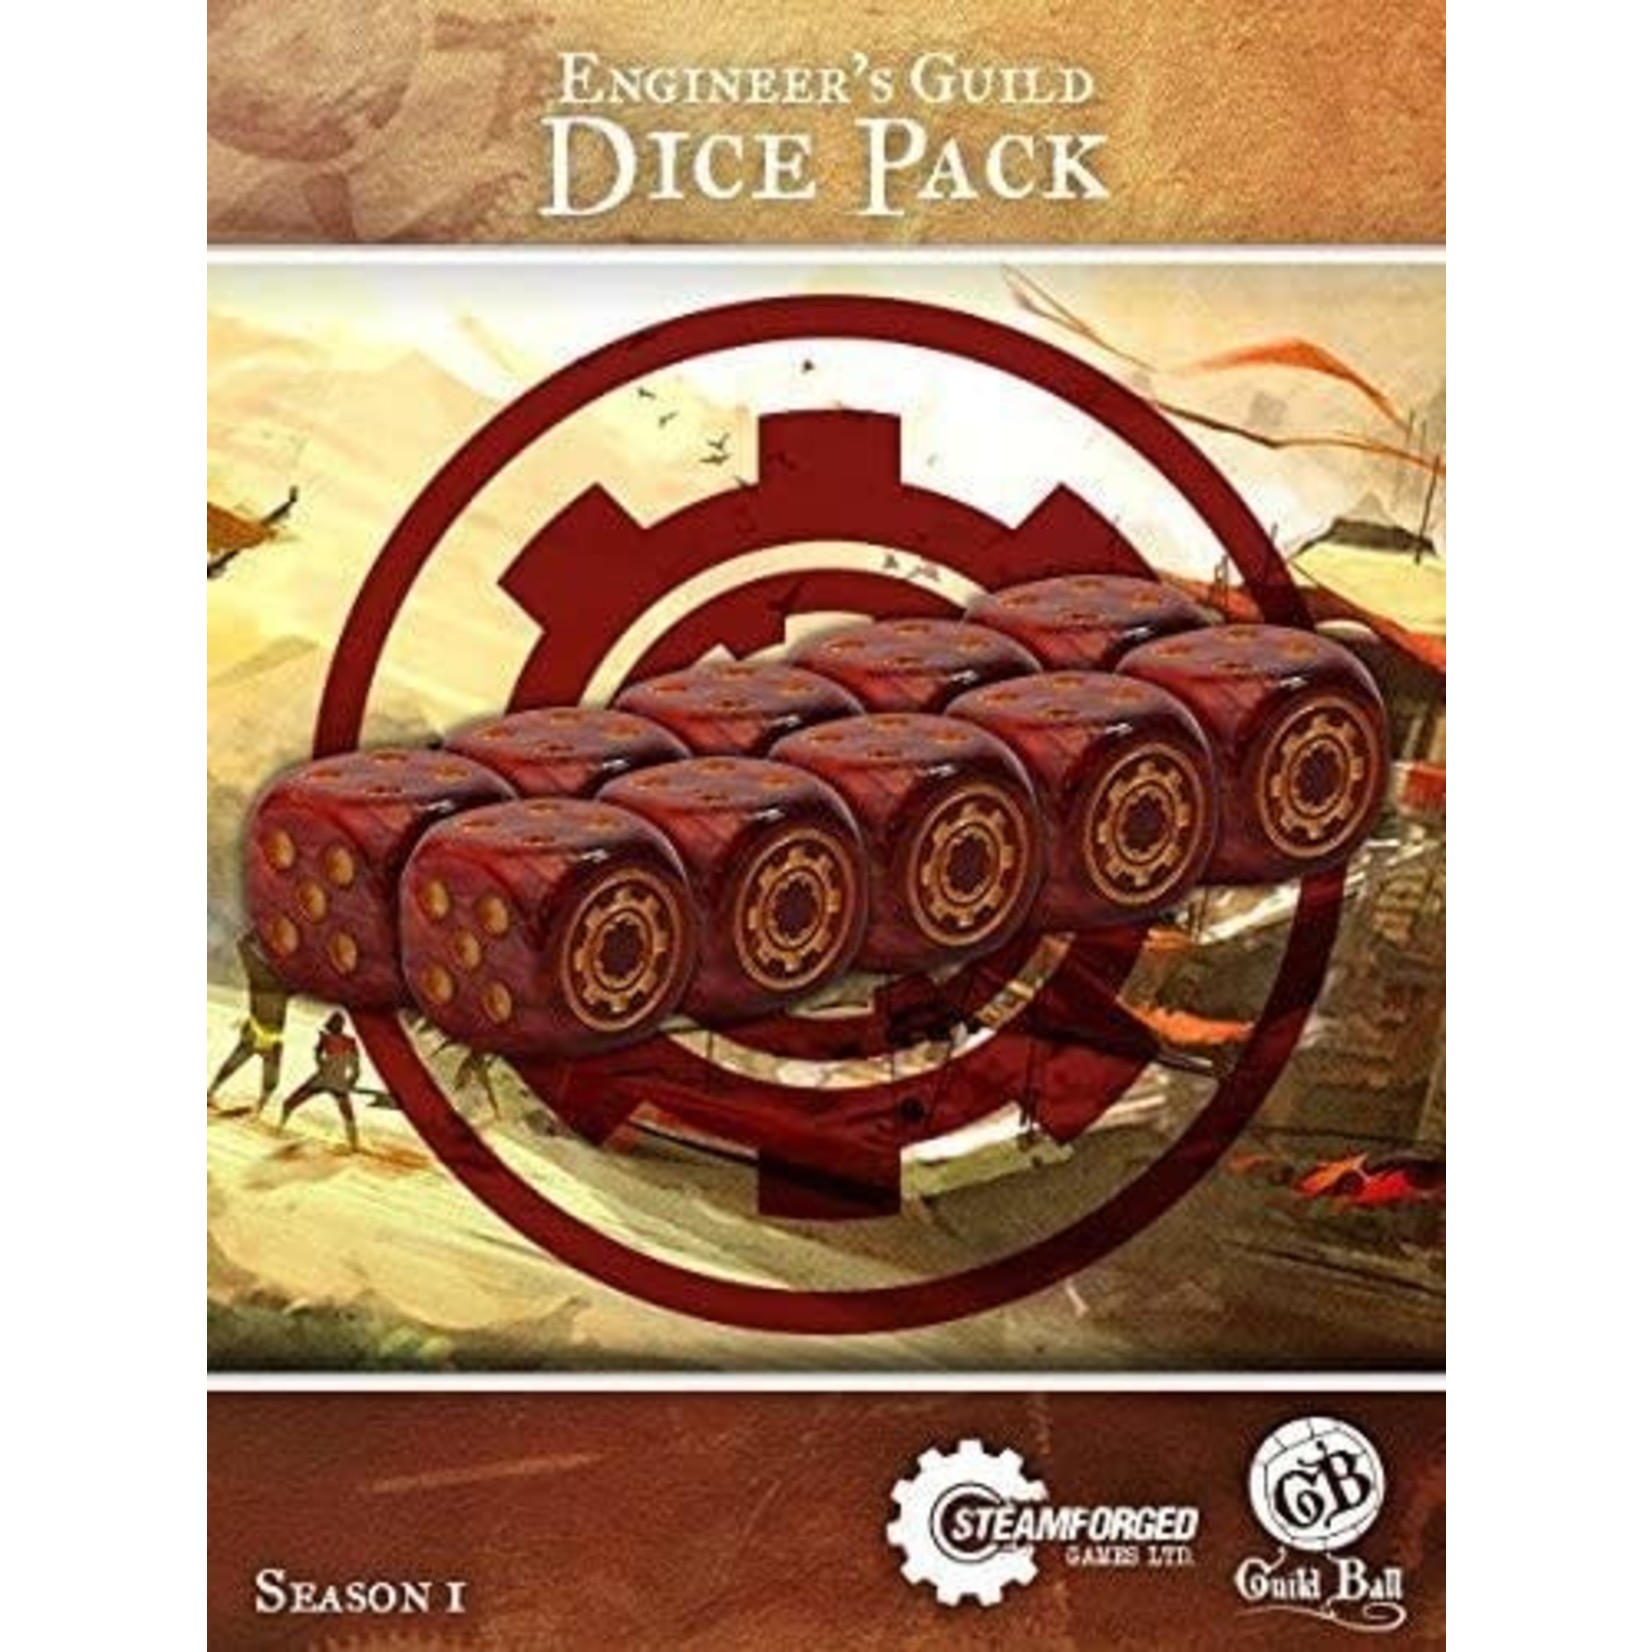 Steamforged Games Guild Ball: Engineers Guild Dice